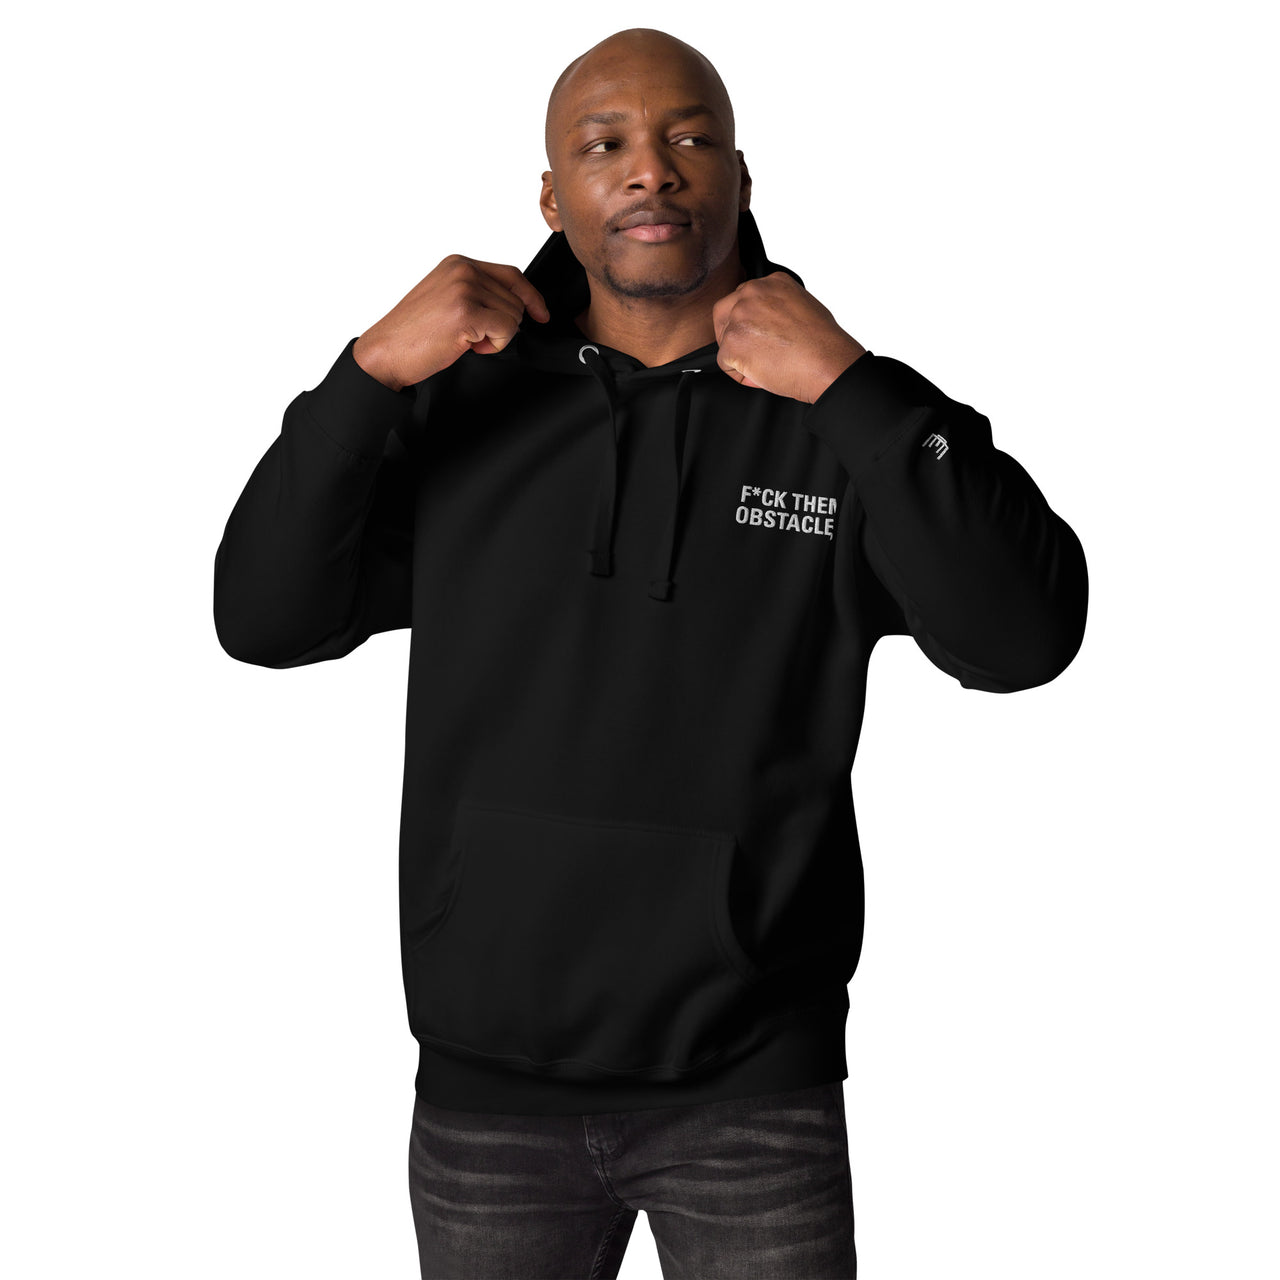 F*CK THEM OBSTACLES Embroidered Unisex Hoodie